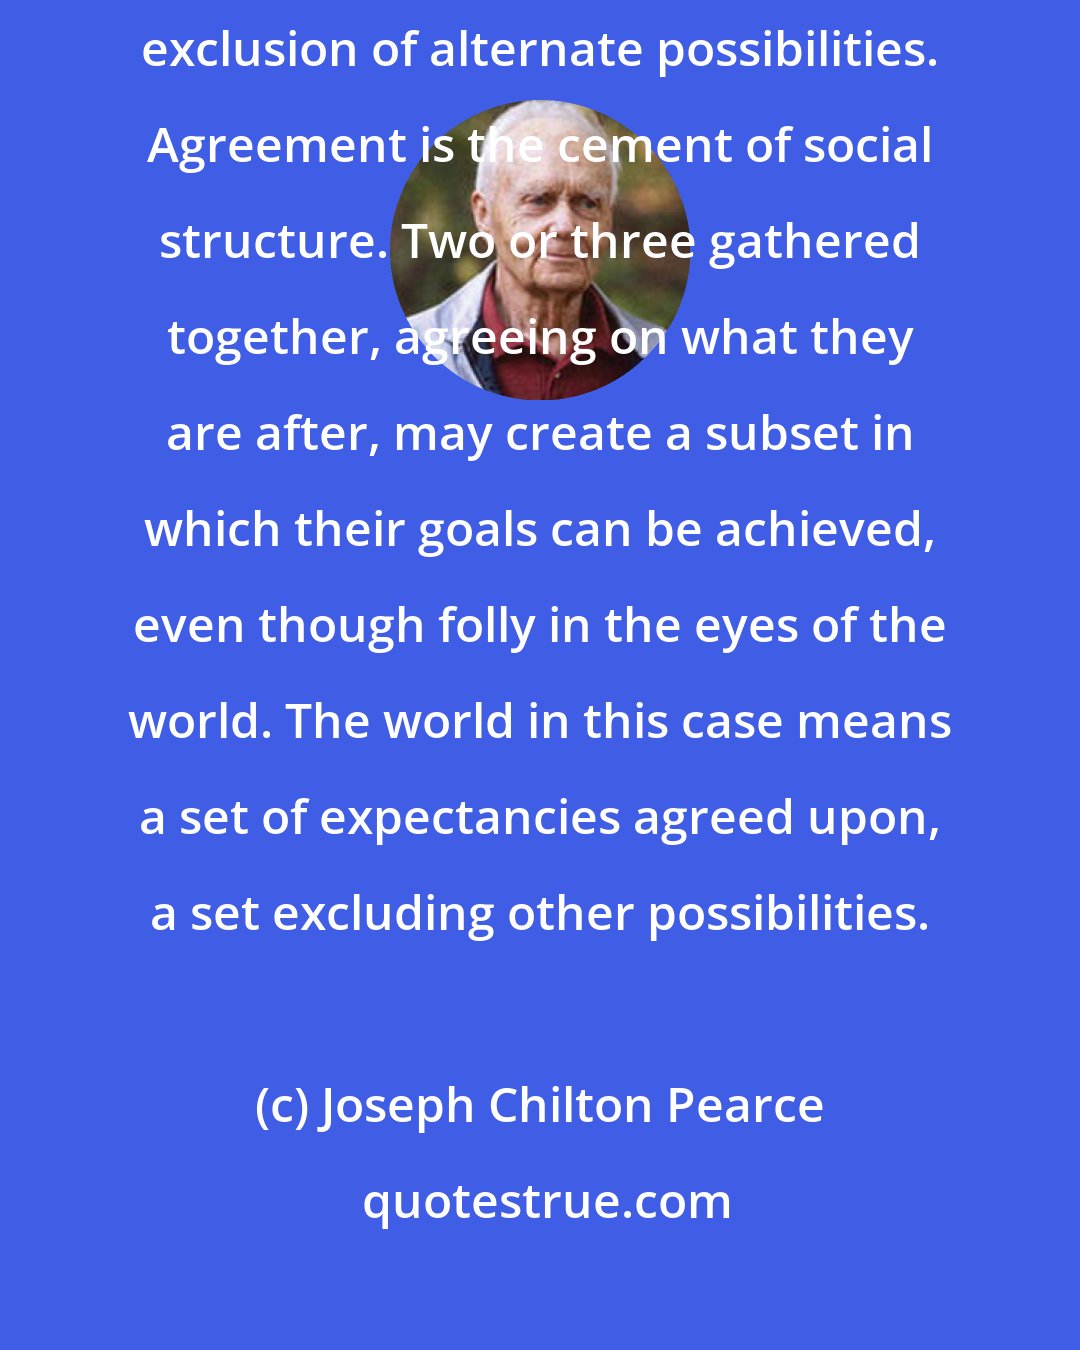 Joseph Chilton Pearce: We are limited by our agreements on possibility. Agreement is a common exclusion of alternate possibilities. Agreement is the cement of social structure. Two or three gathered together, agreeing on what they are after, may create a subset in which their goals can be achieved, even though folly in the eyes of the world. The world in this case means a set of expectancies agreed upon, a set excluding other possibilities.